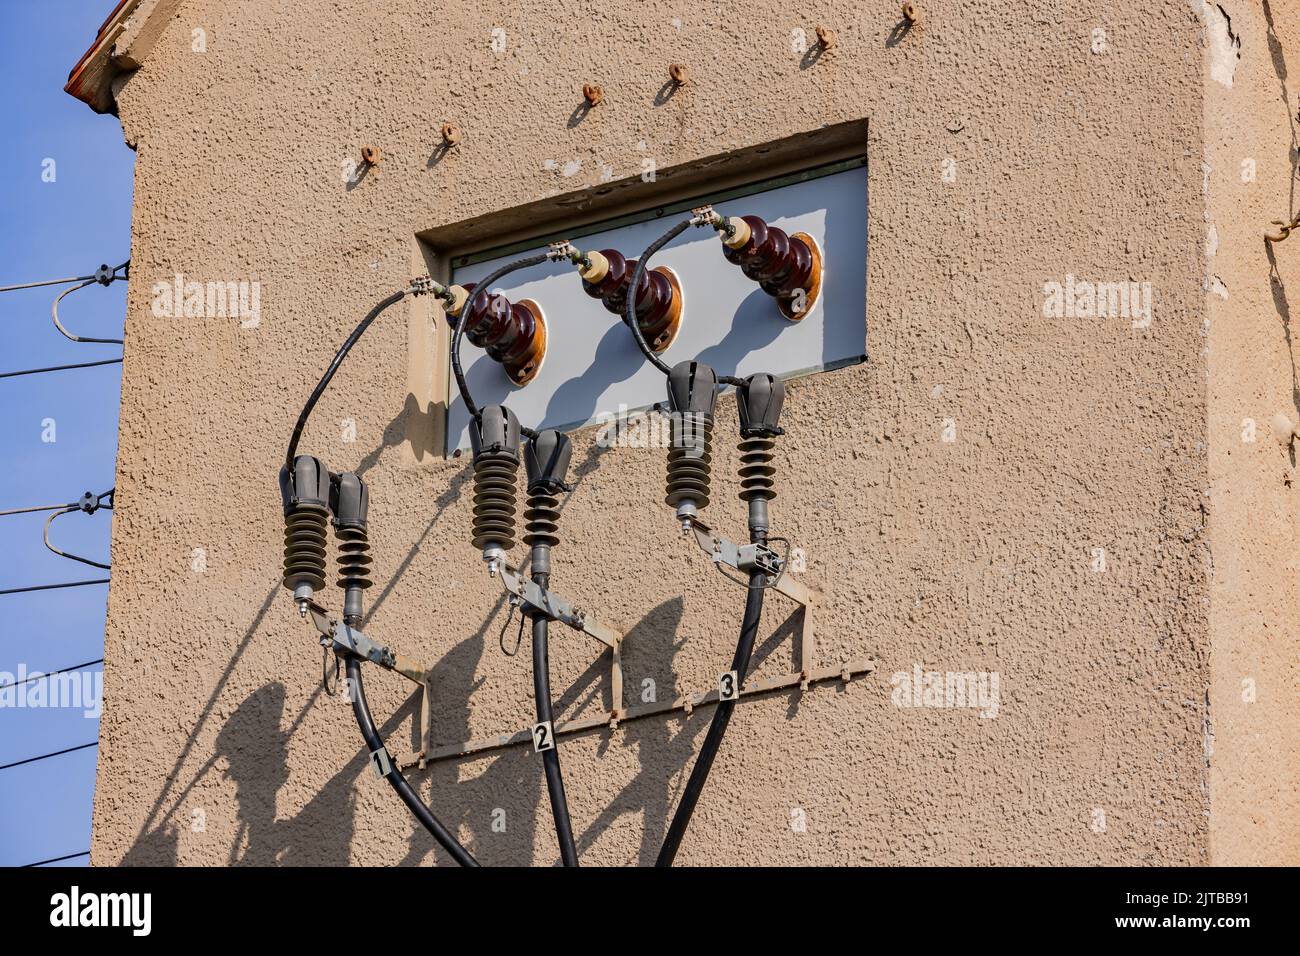 Power lines and resistances of a tower for transformation of electricity, Germany Stock Photo